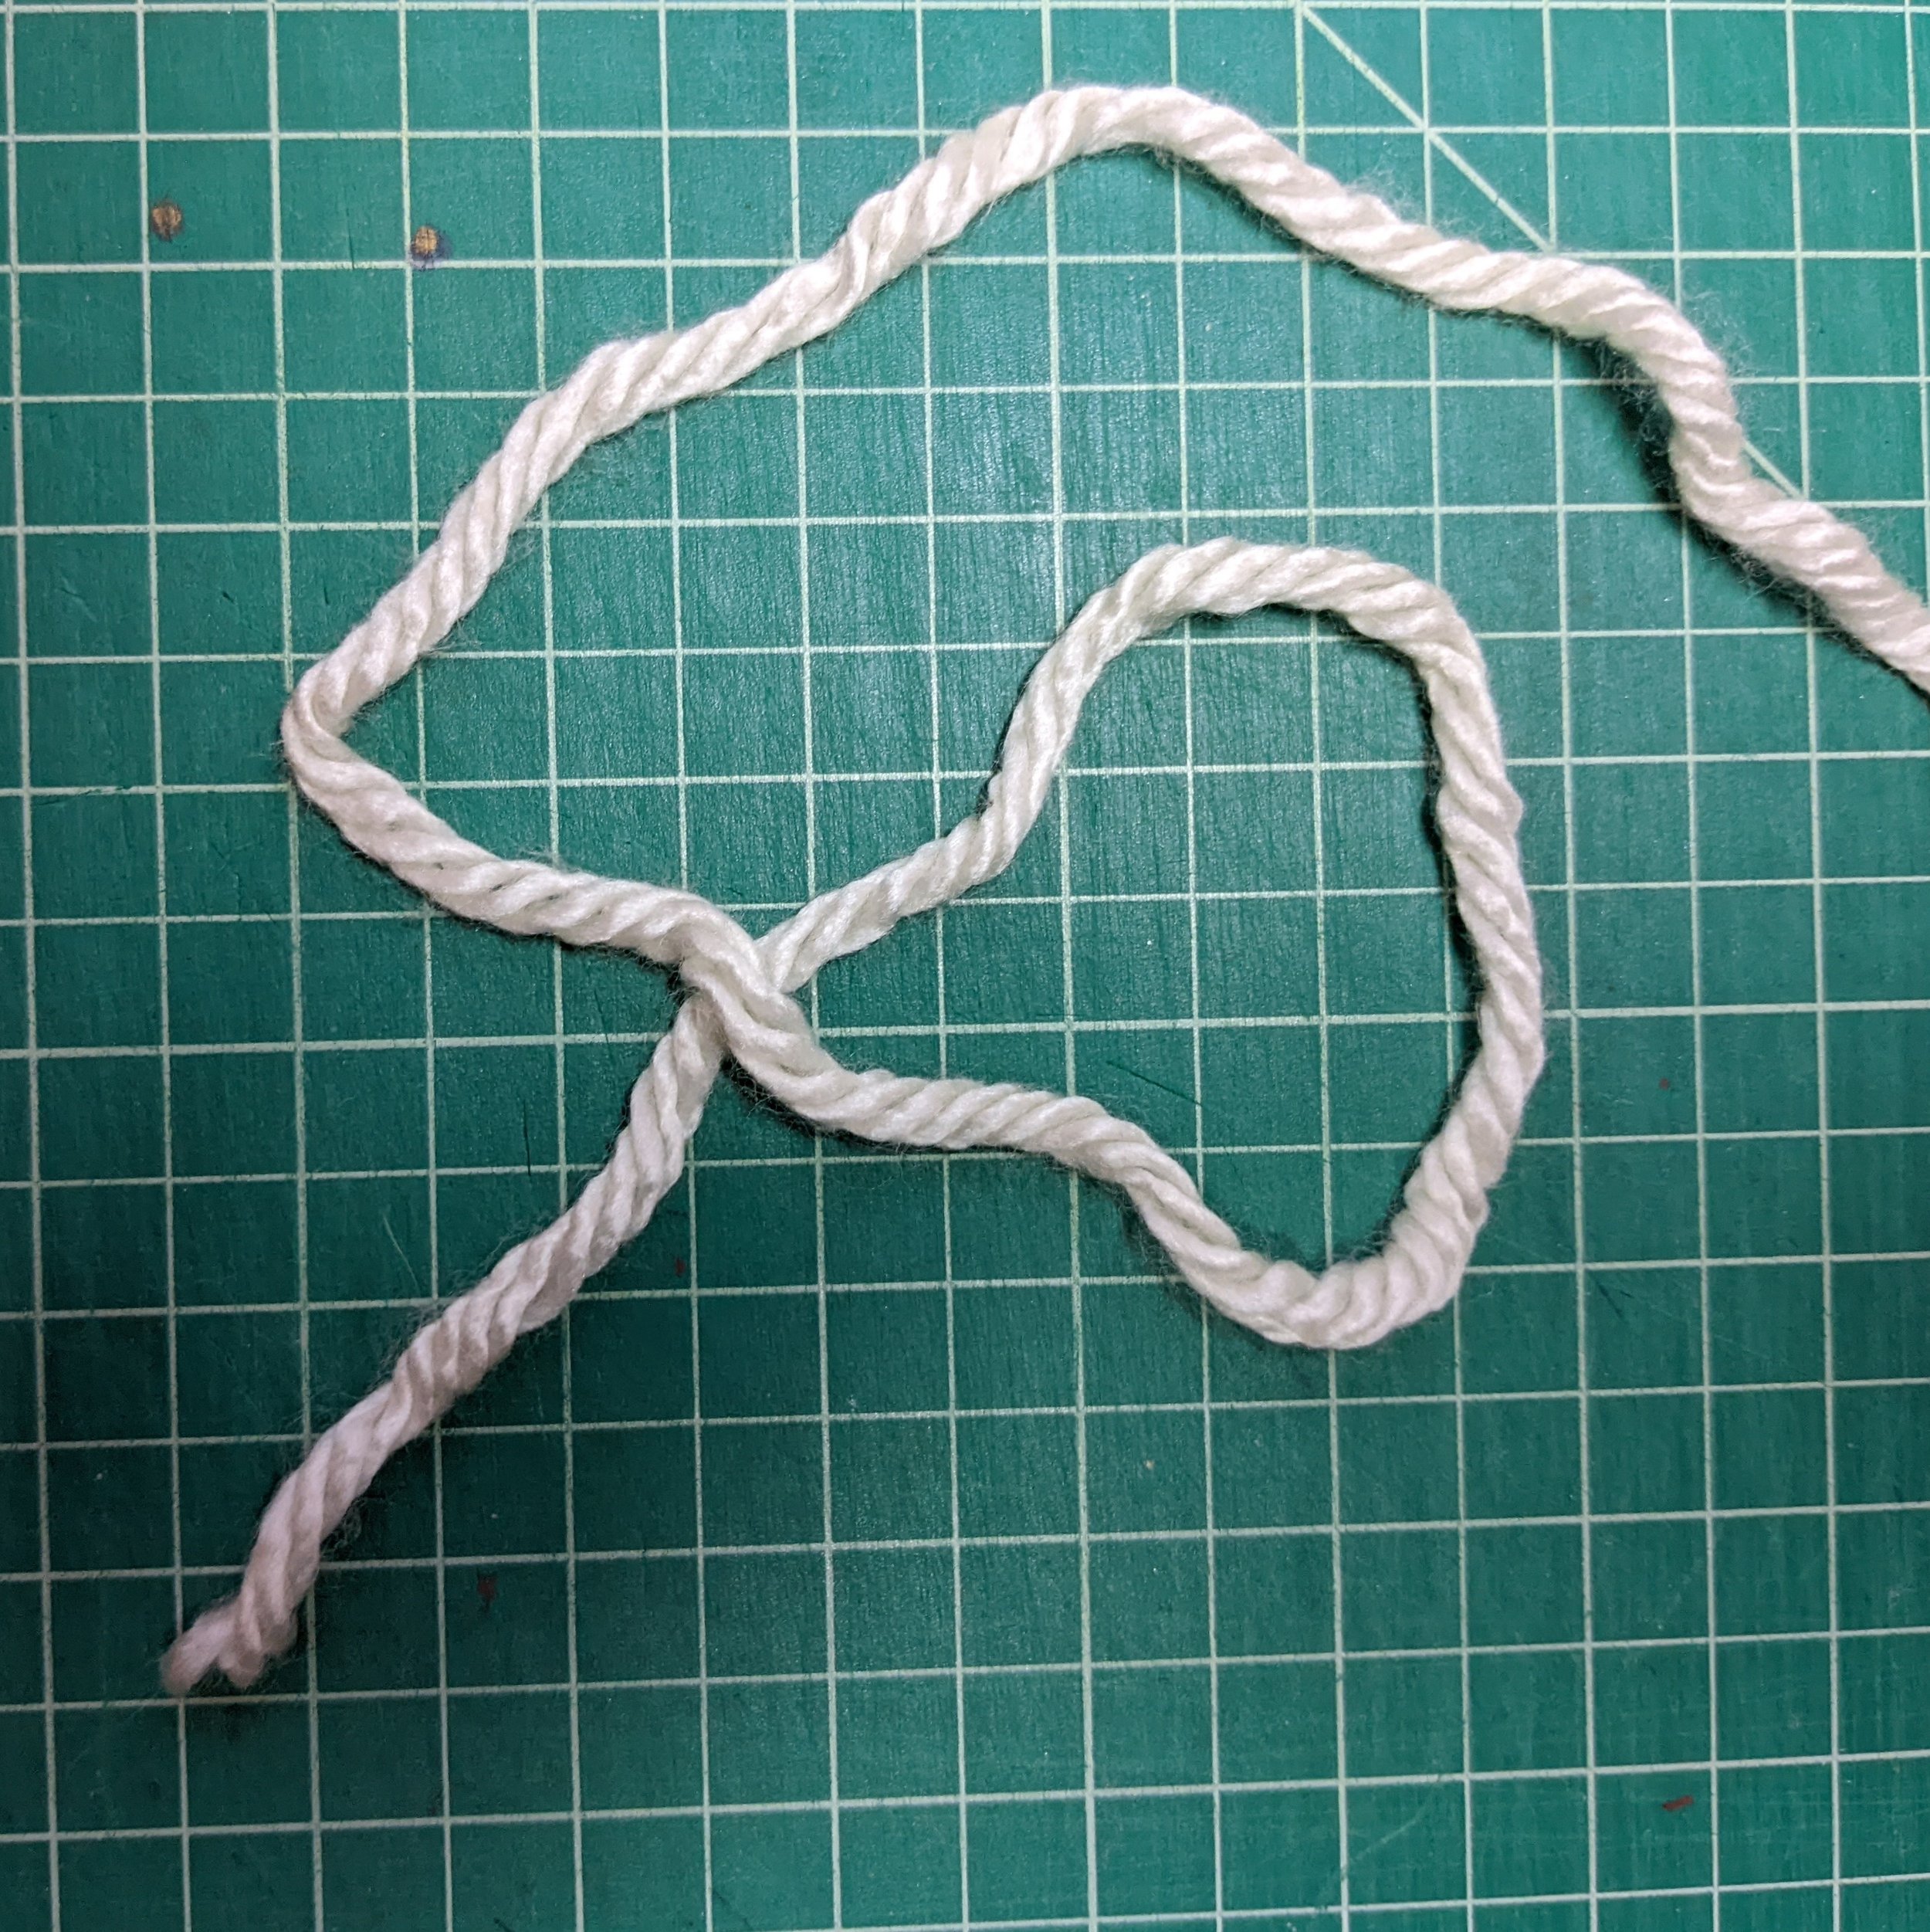 Step 2: Move the right yarn over the left yarn to make a loop